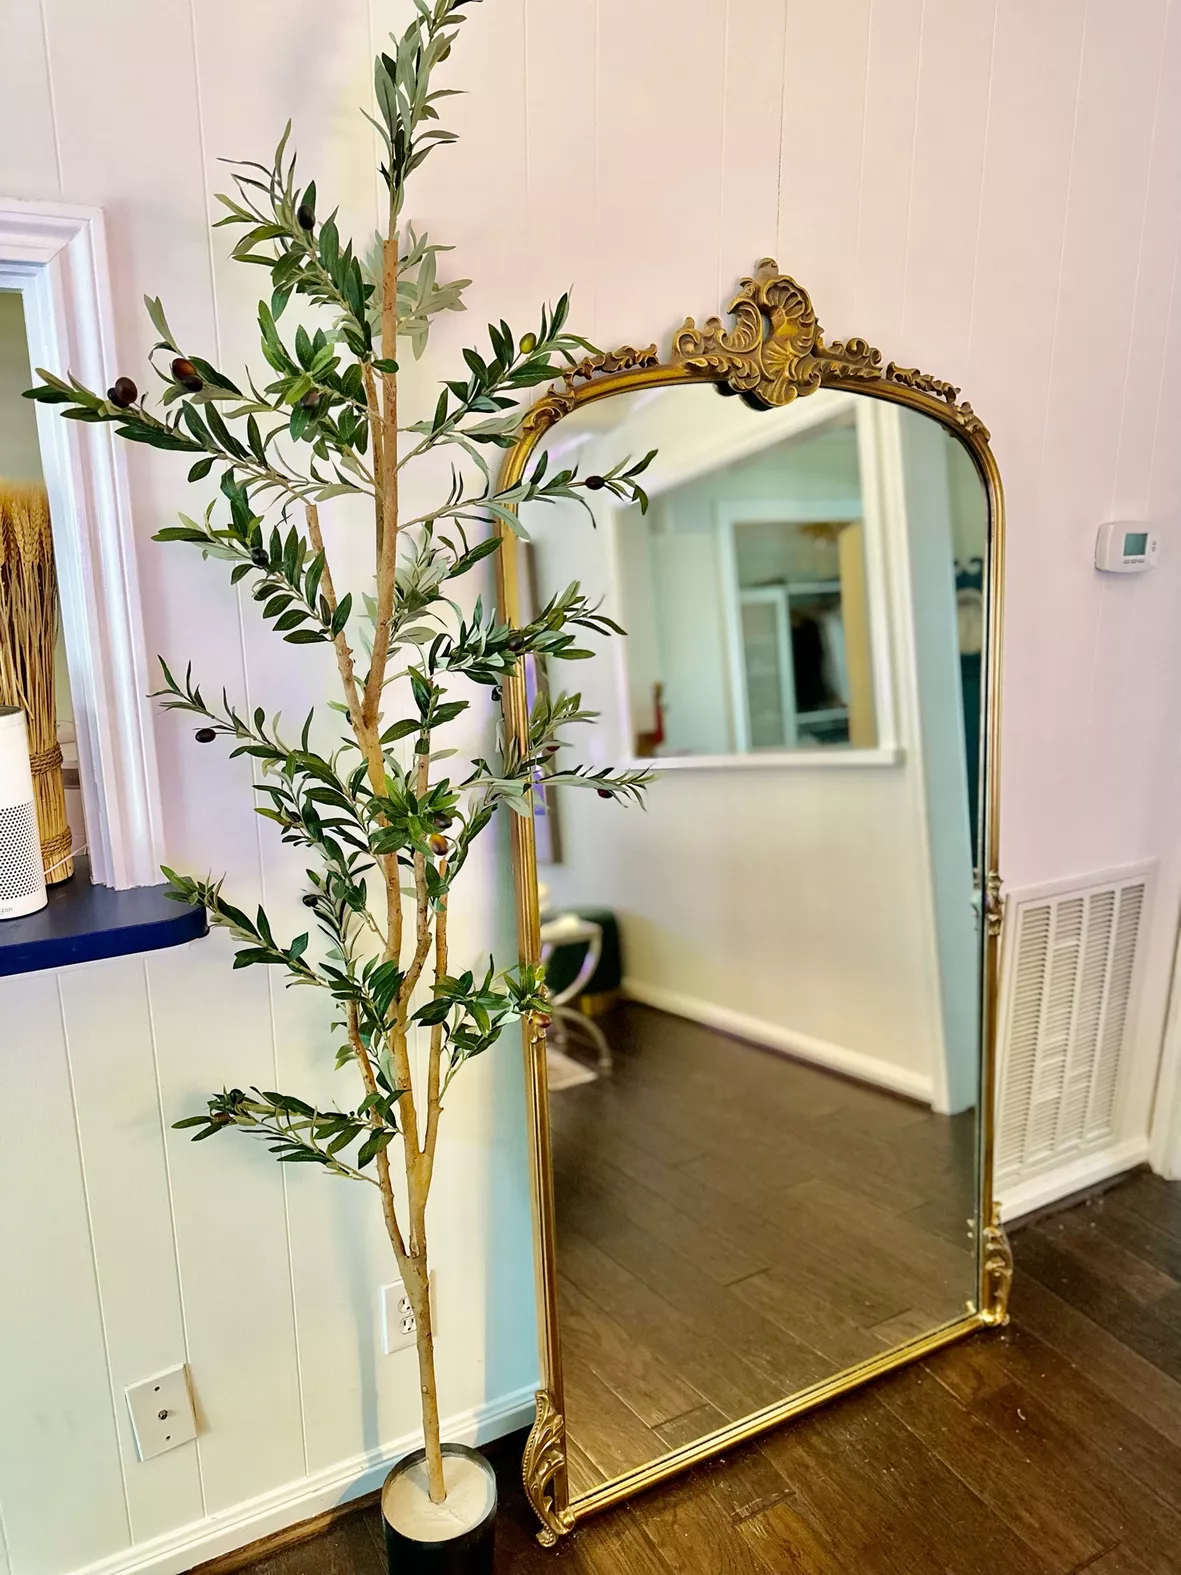 82” Artificial Olive Tree